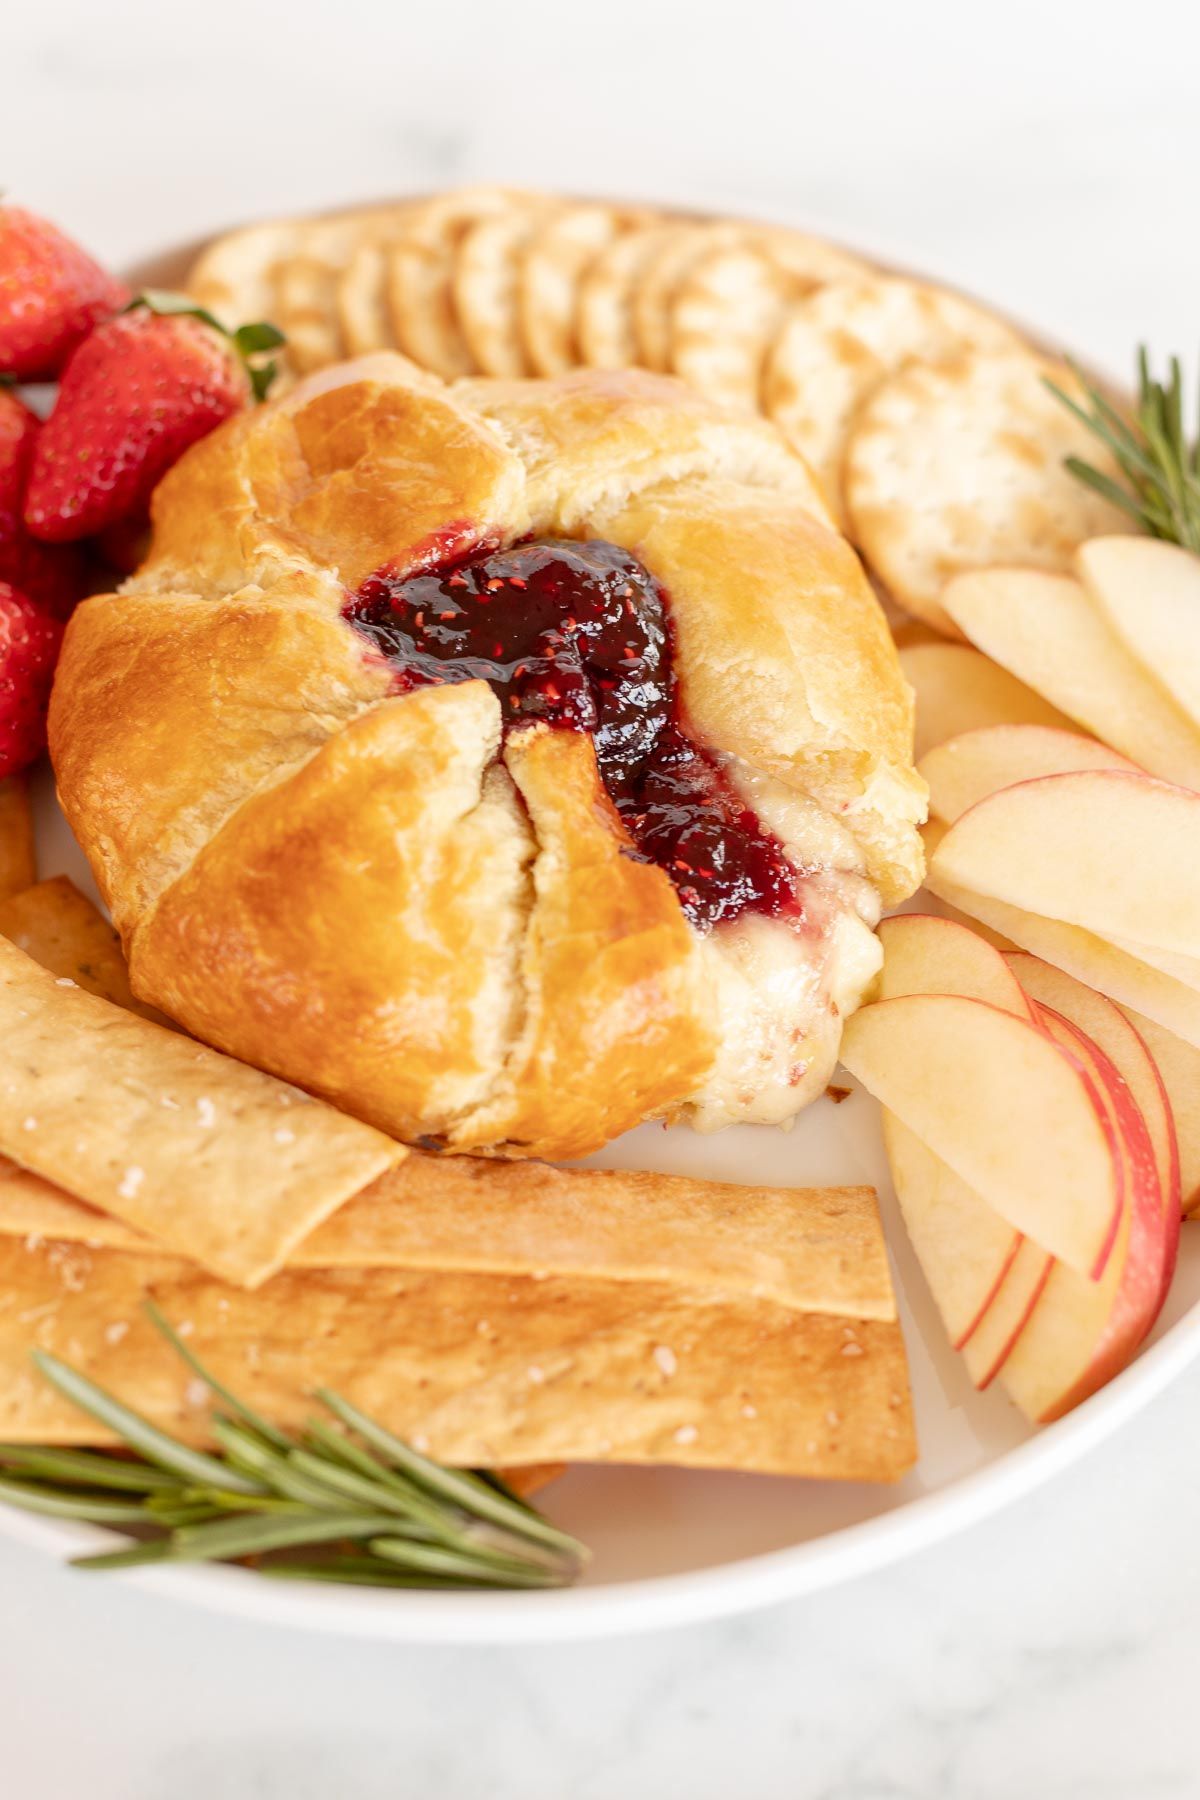 baked brie in puff pastry surrounded by fruit and crackers